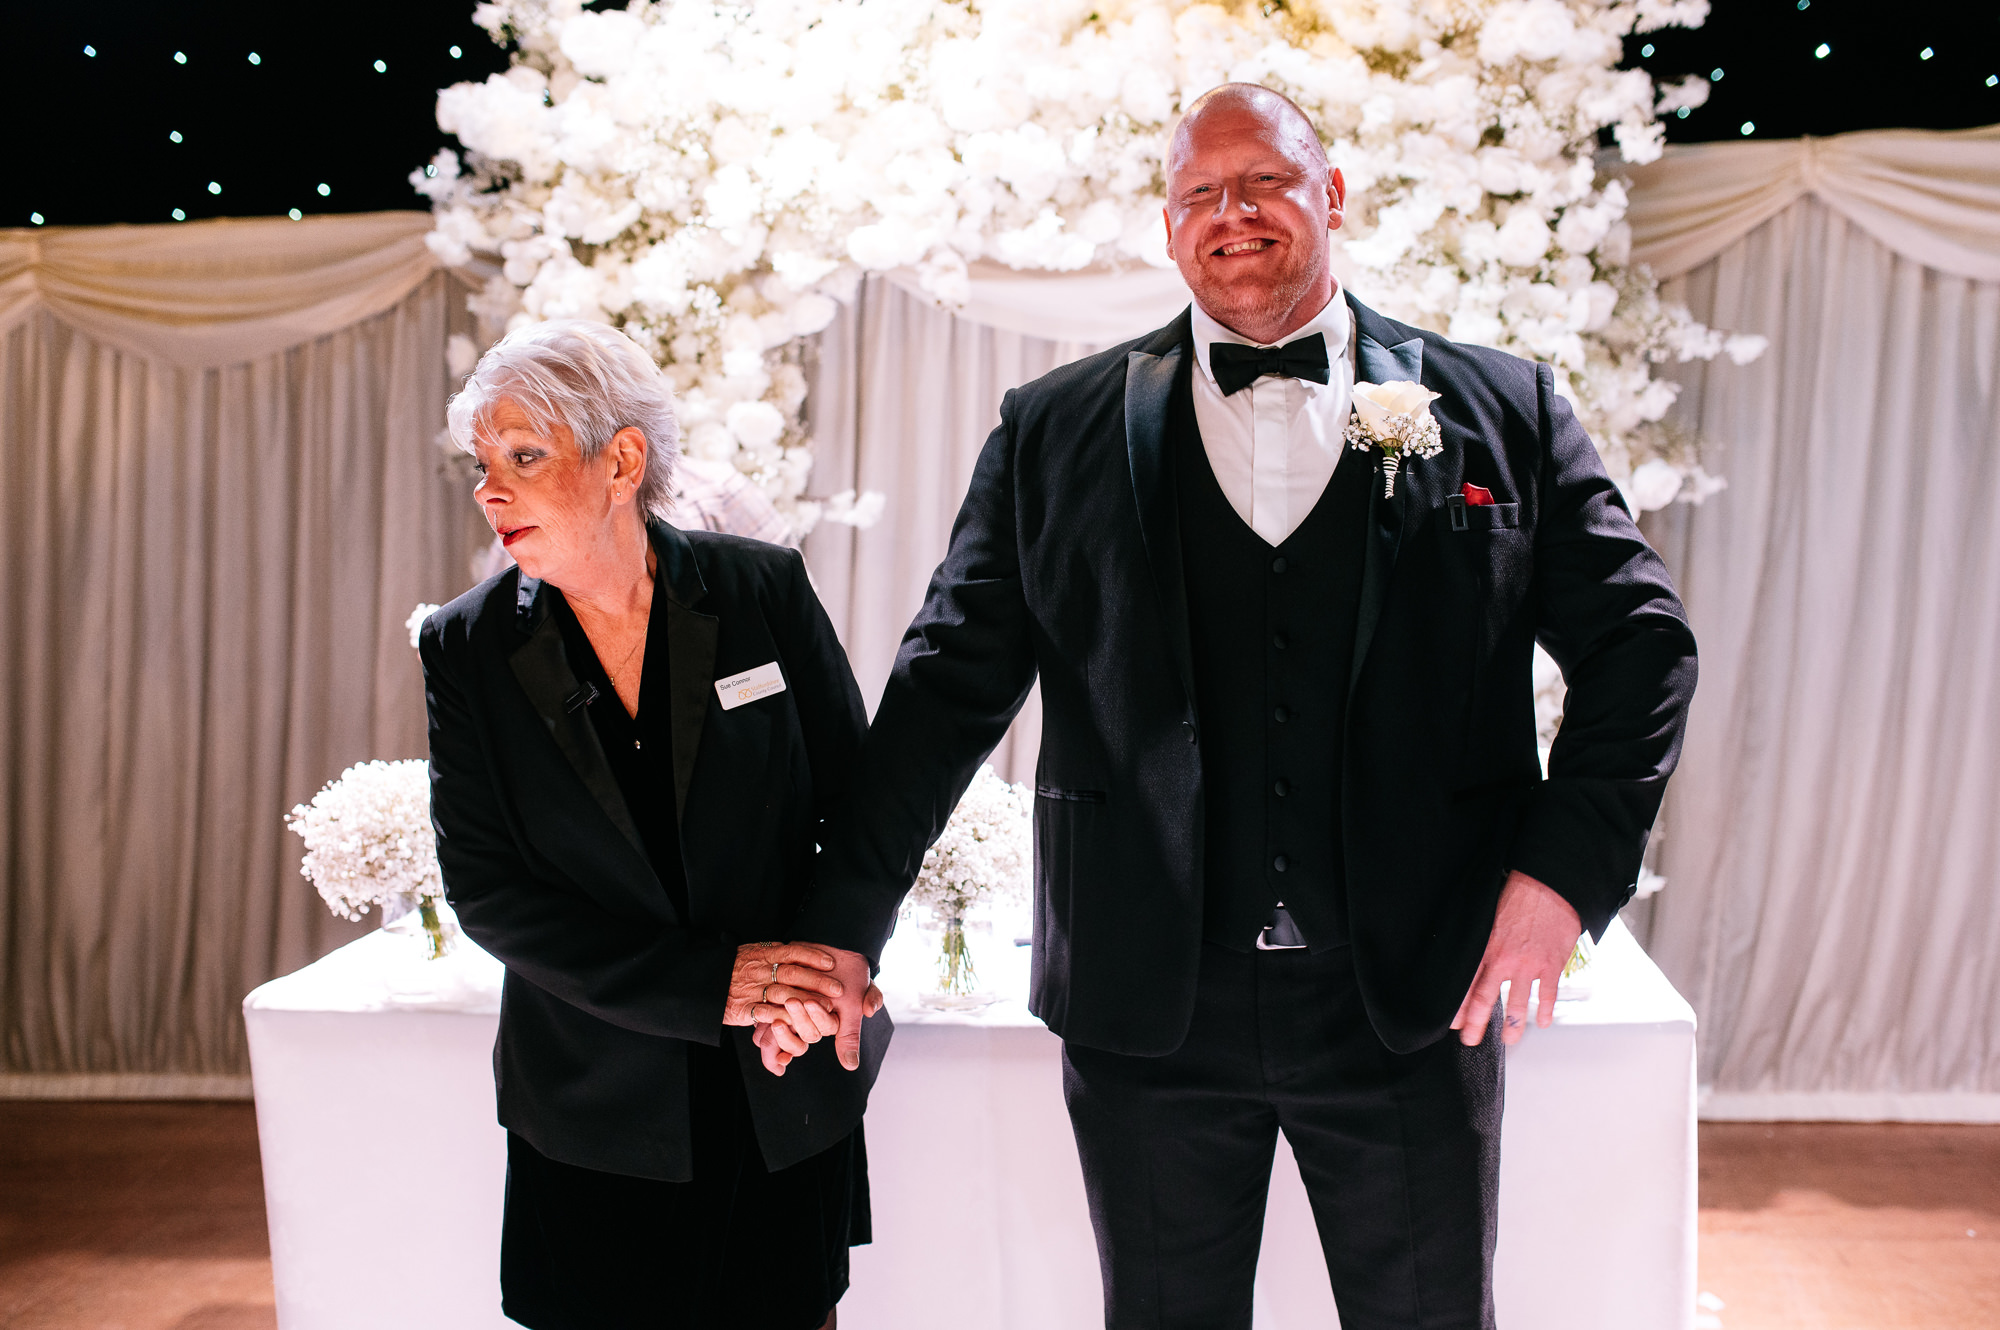 registrar holding the grooms hand before the ceremony